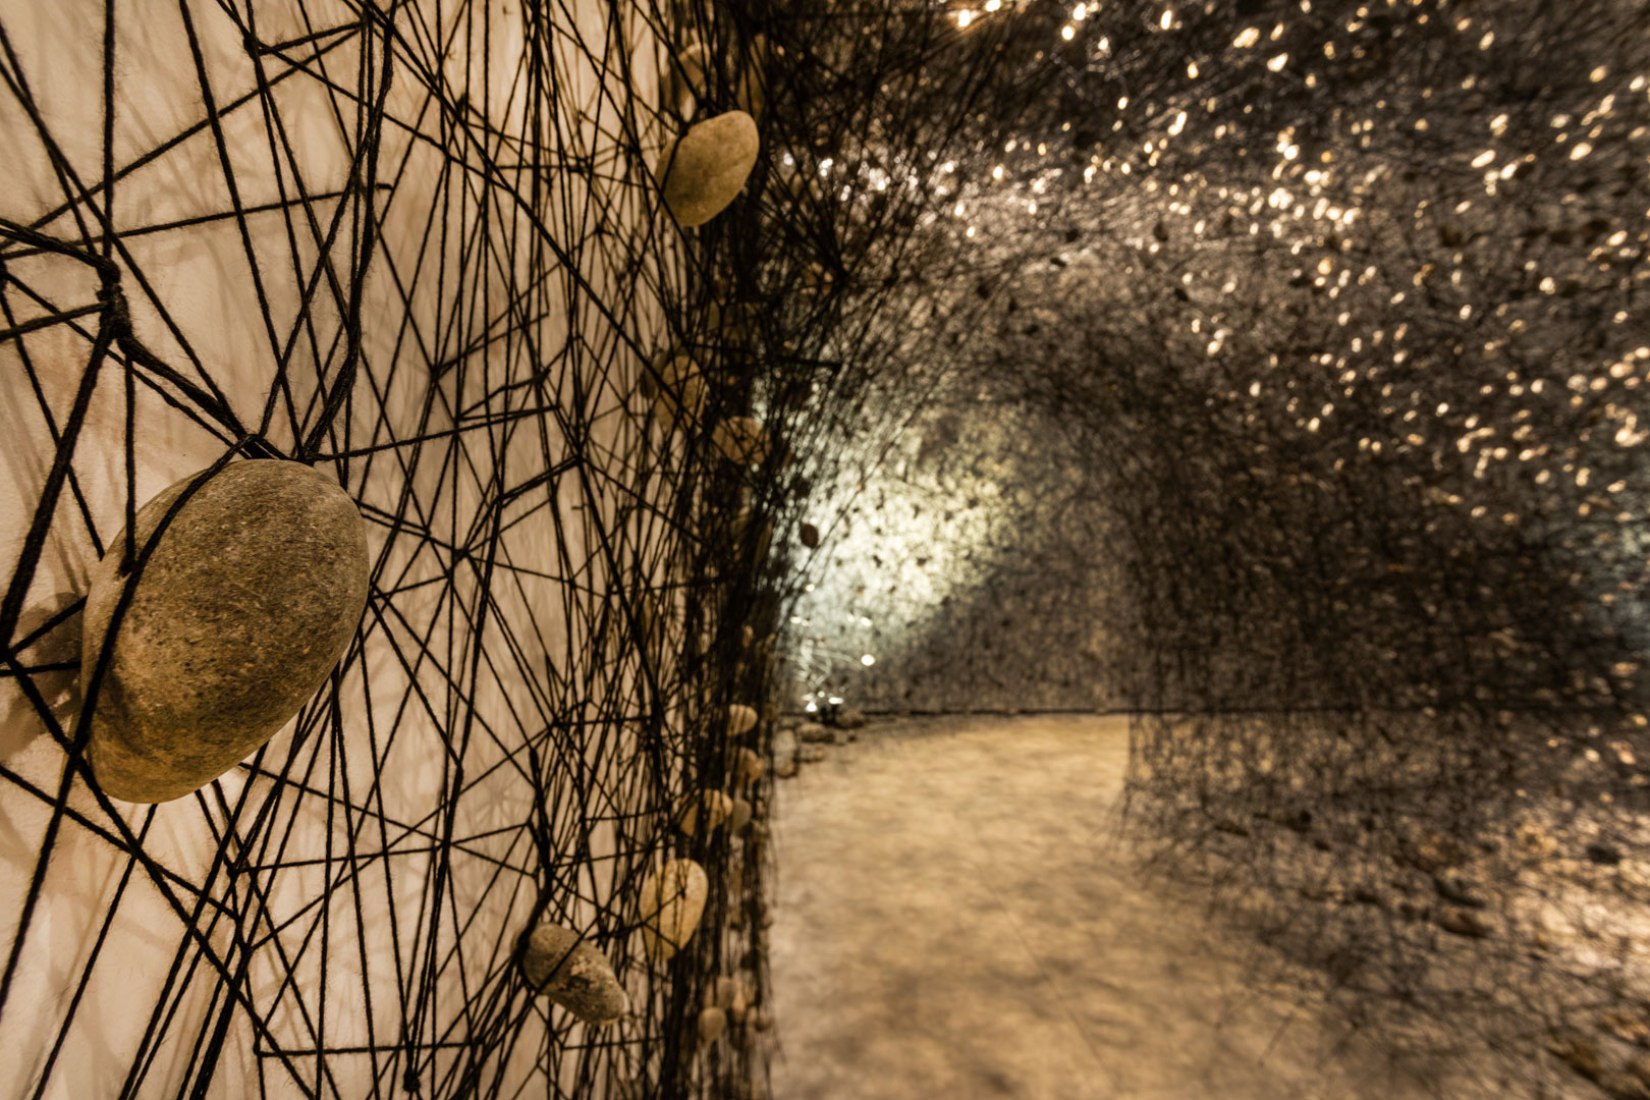 'In the beginning was…' by Chiharu Shiota. Photography courtesy of Fundació Sorigué.